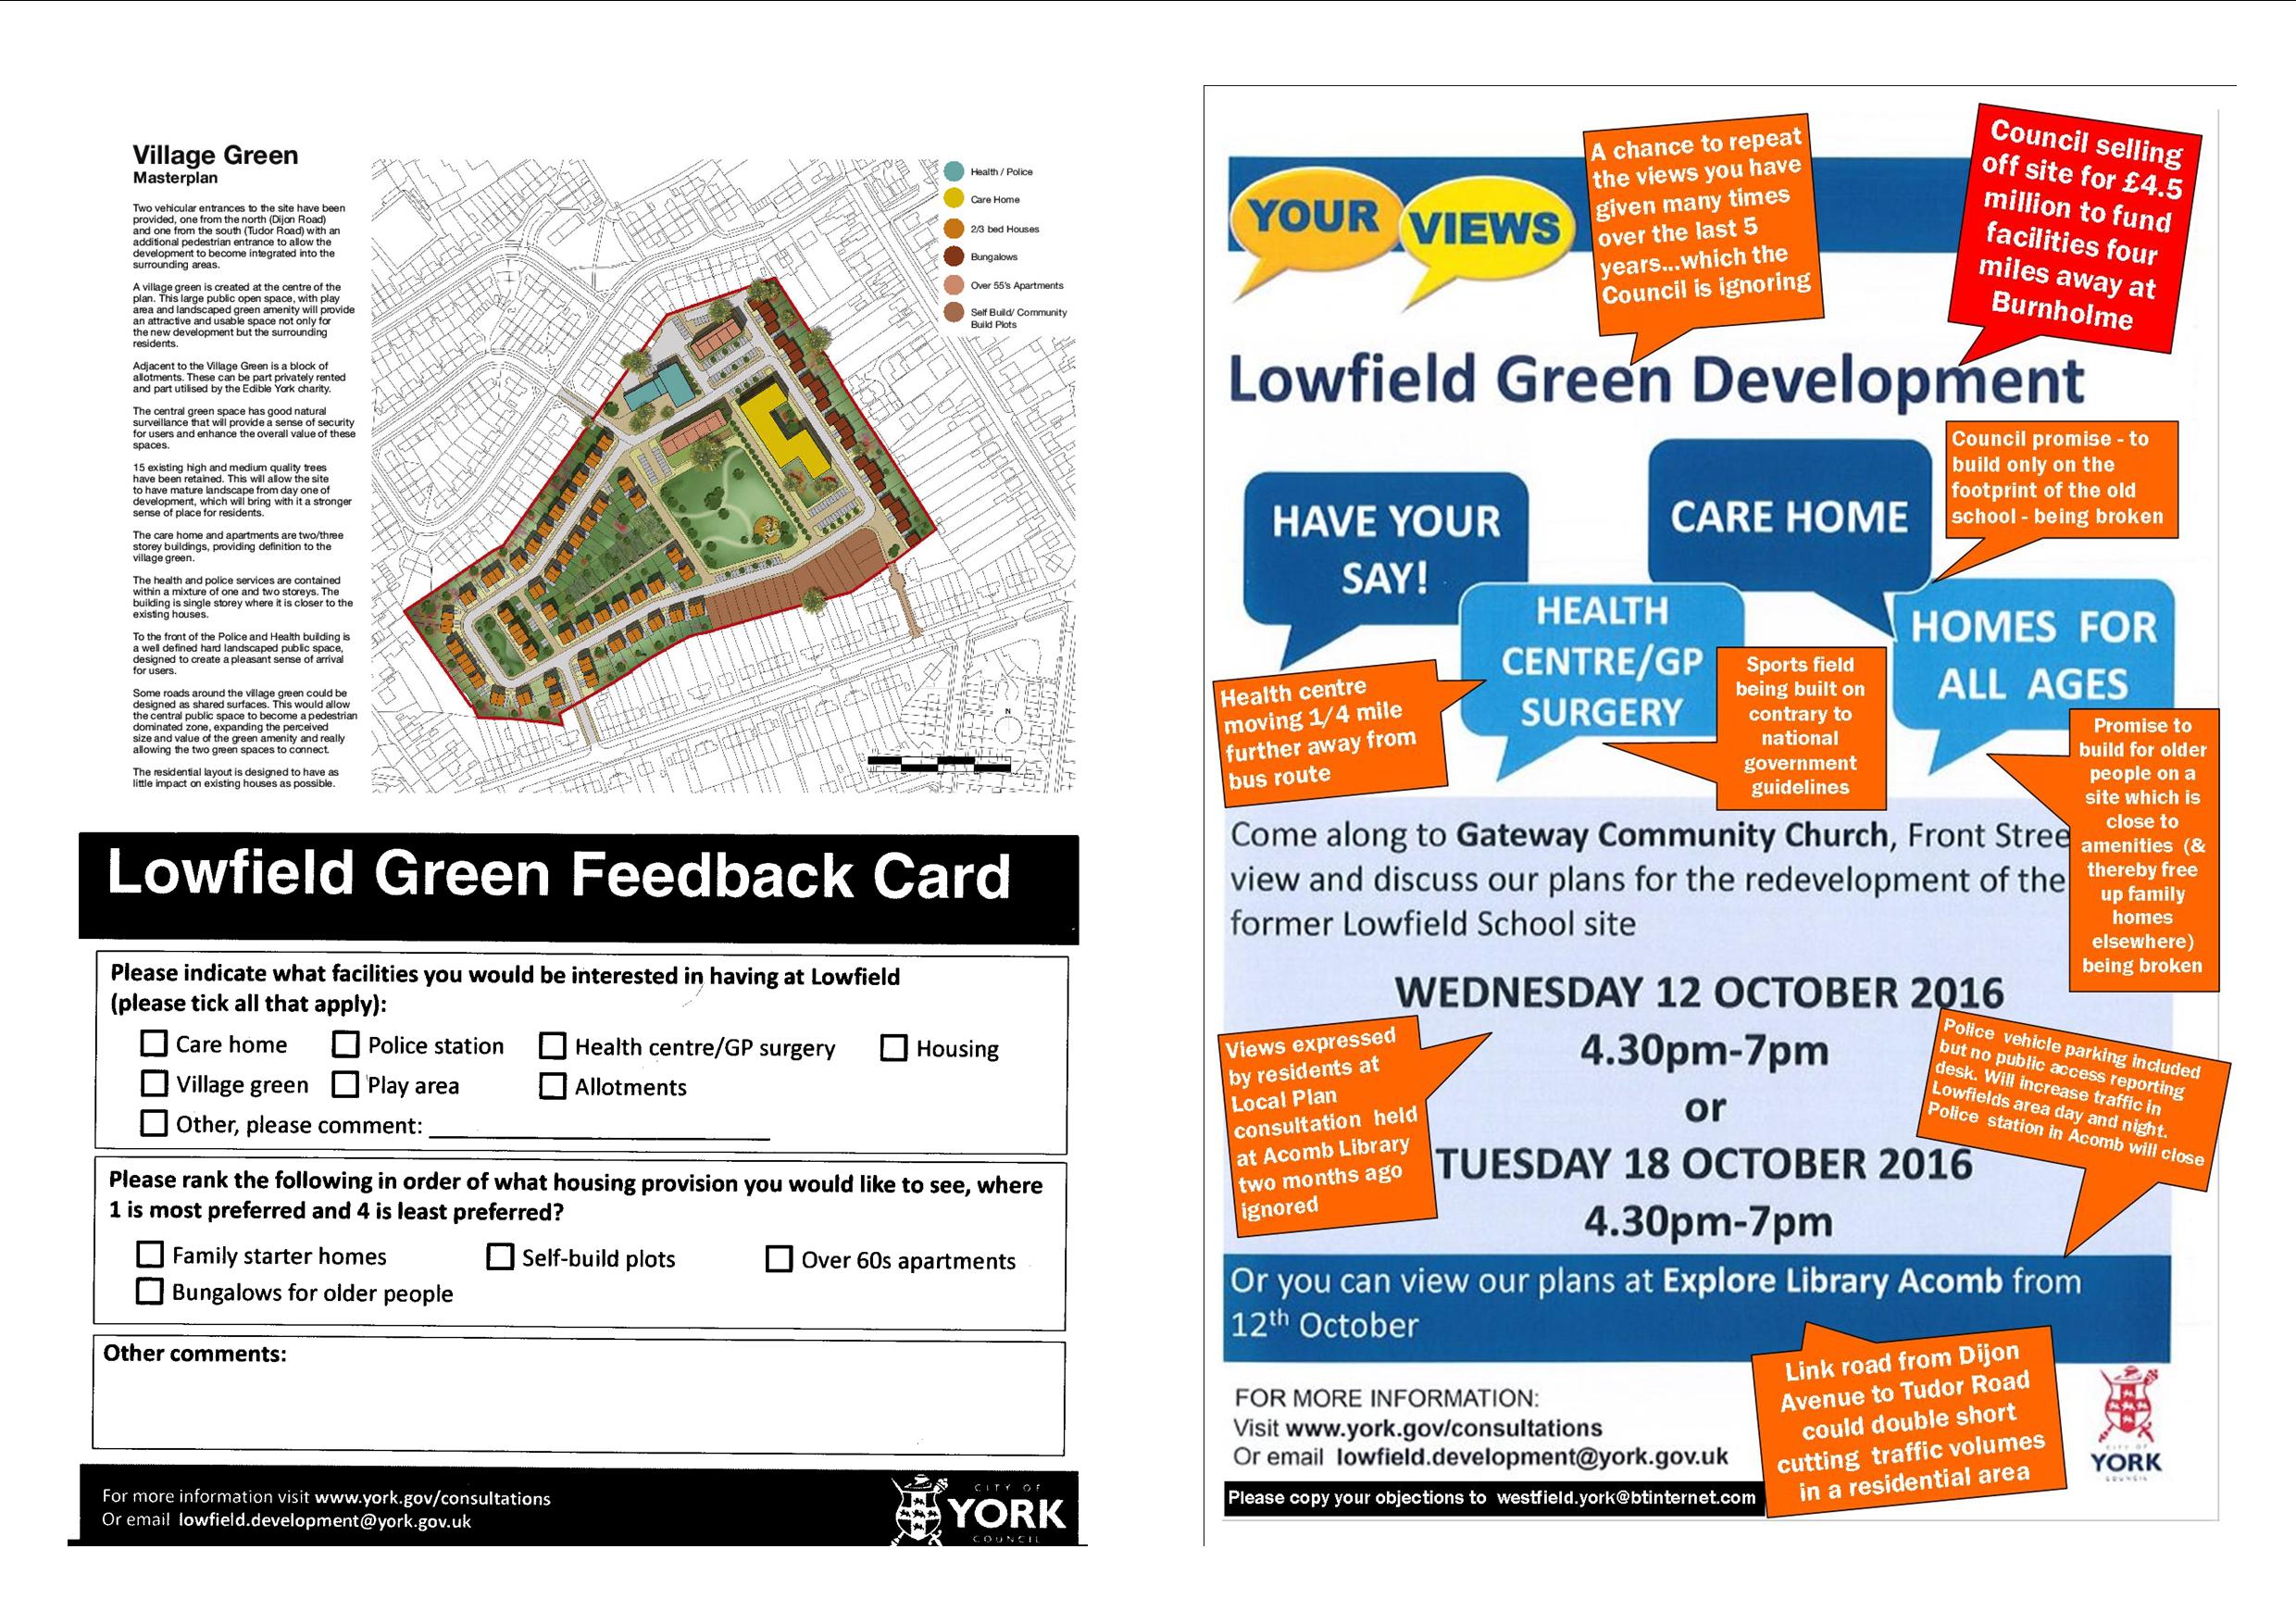 On Wednesday the Council staged the first of two exhibitions on their plans for the development of the Lowfields site. Few residents seem to have received a letter which the council claimed it had delivered in the area alerting people to the events. Residents reacted to the plans which can be seen at Acomb Explore Library. Visitors to the Library can fill in a short comments card. Concerns included increased traffic levels in the area and misleading claims about the provision of a "Police Station" on the site. Residents plan to issue their own publicity next week to try to encourage more people to attend Wednesday's meeting meeting 